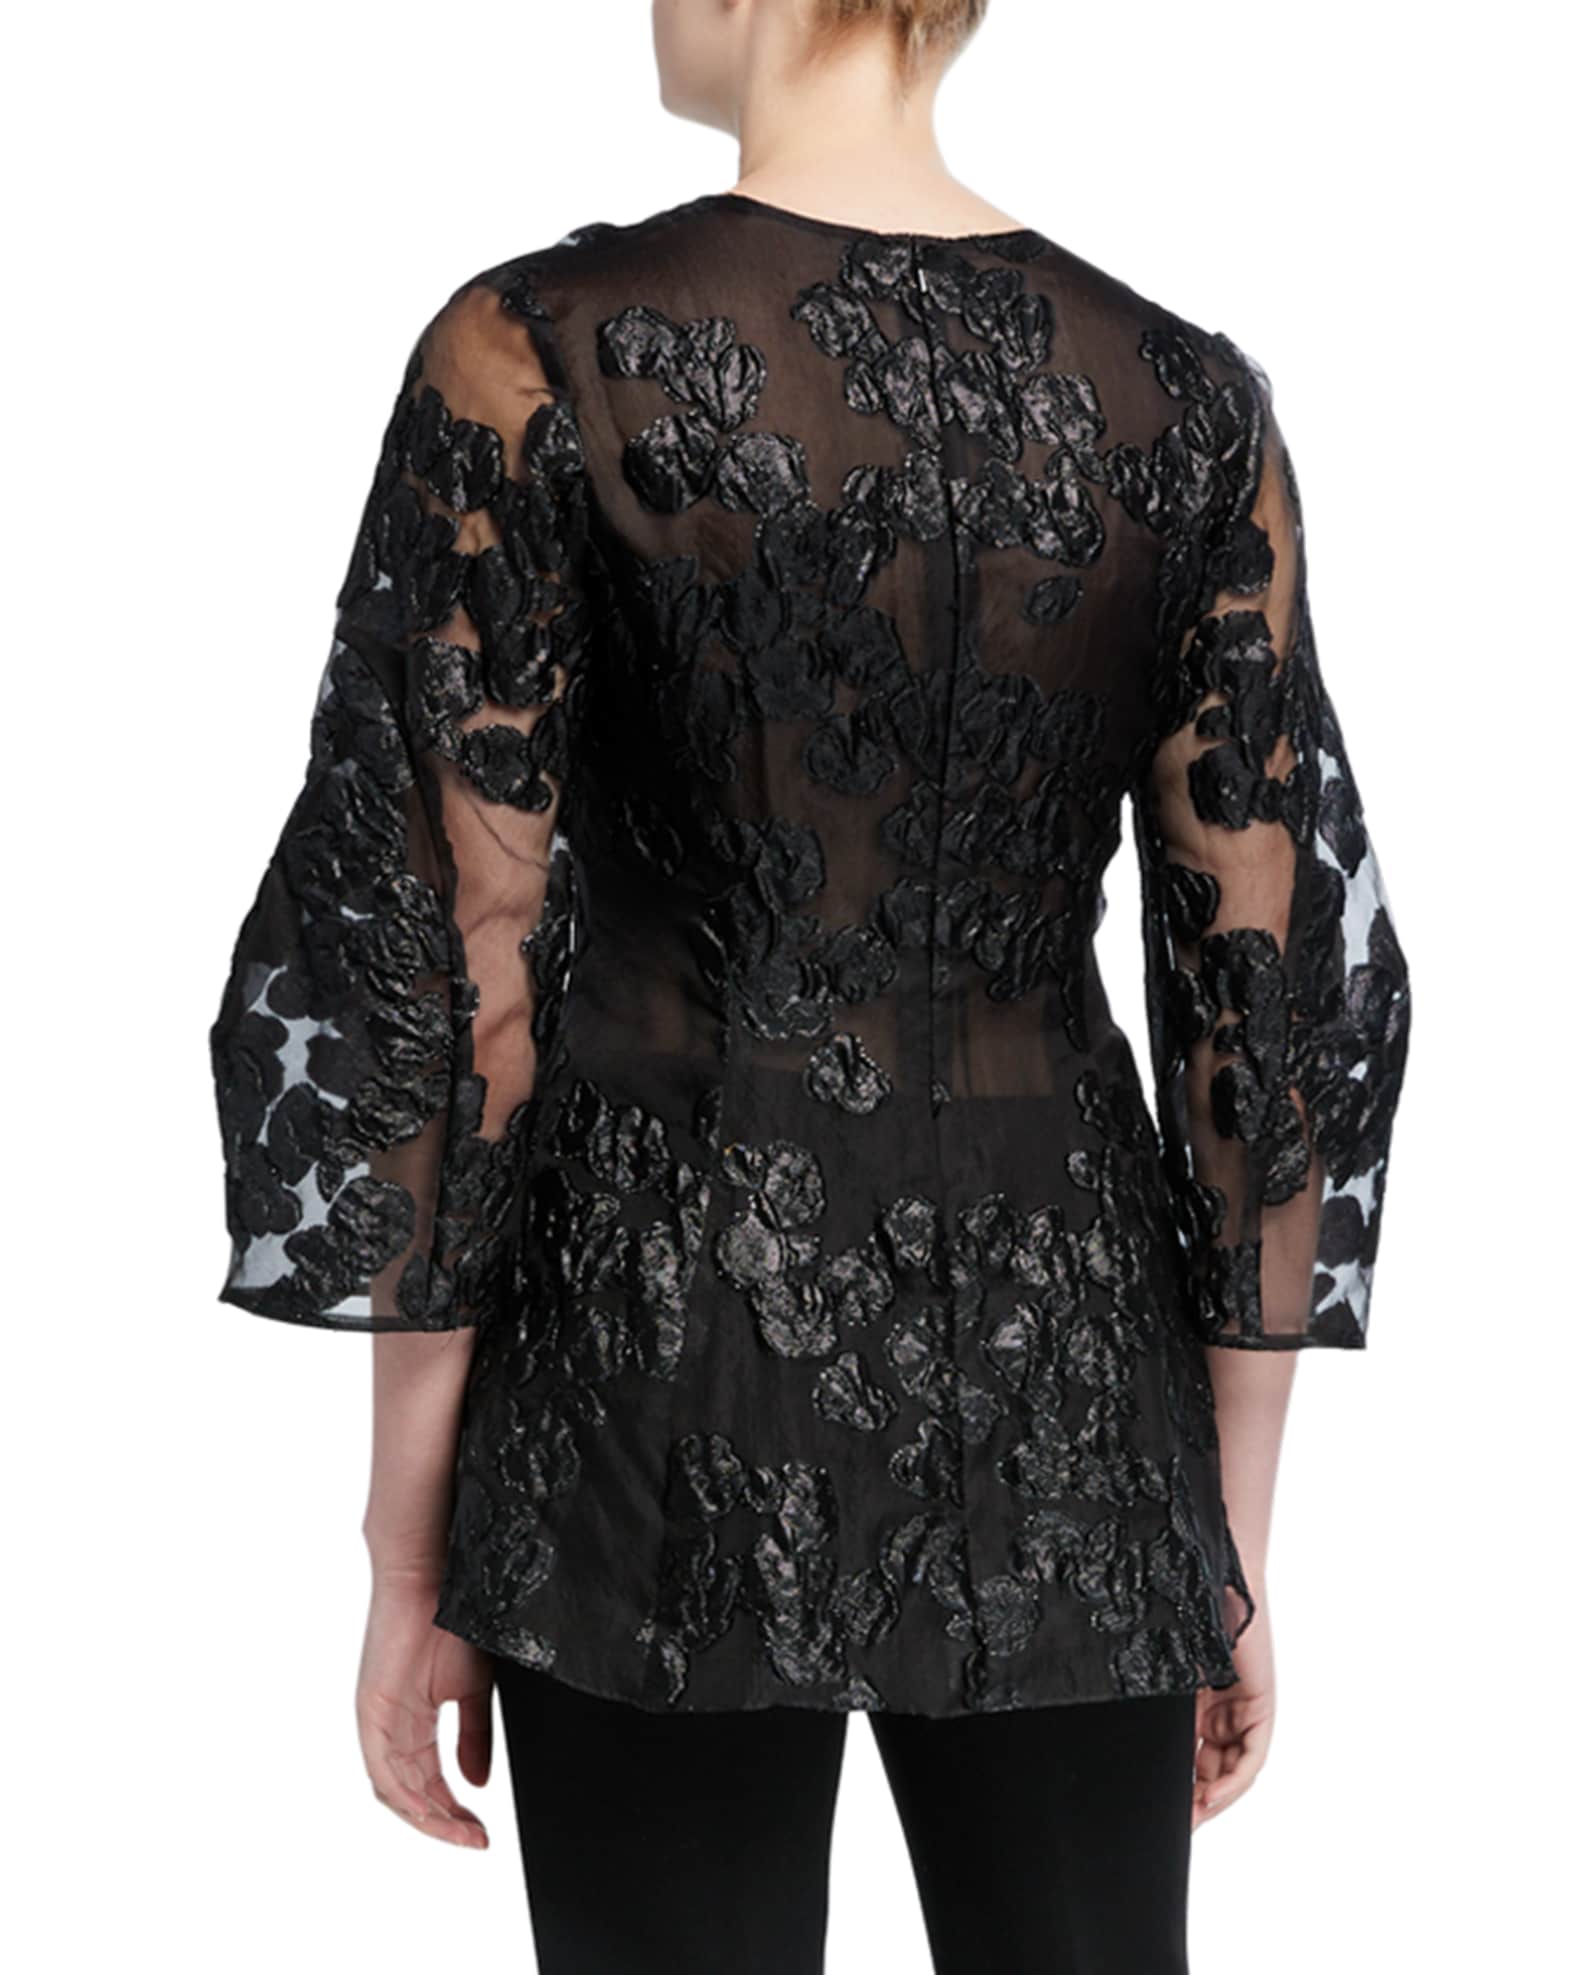 Lace Full-Sleeve V-Neck Blouse and Matching Items | Neiman Marcus